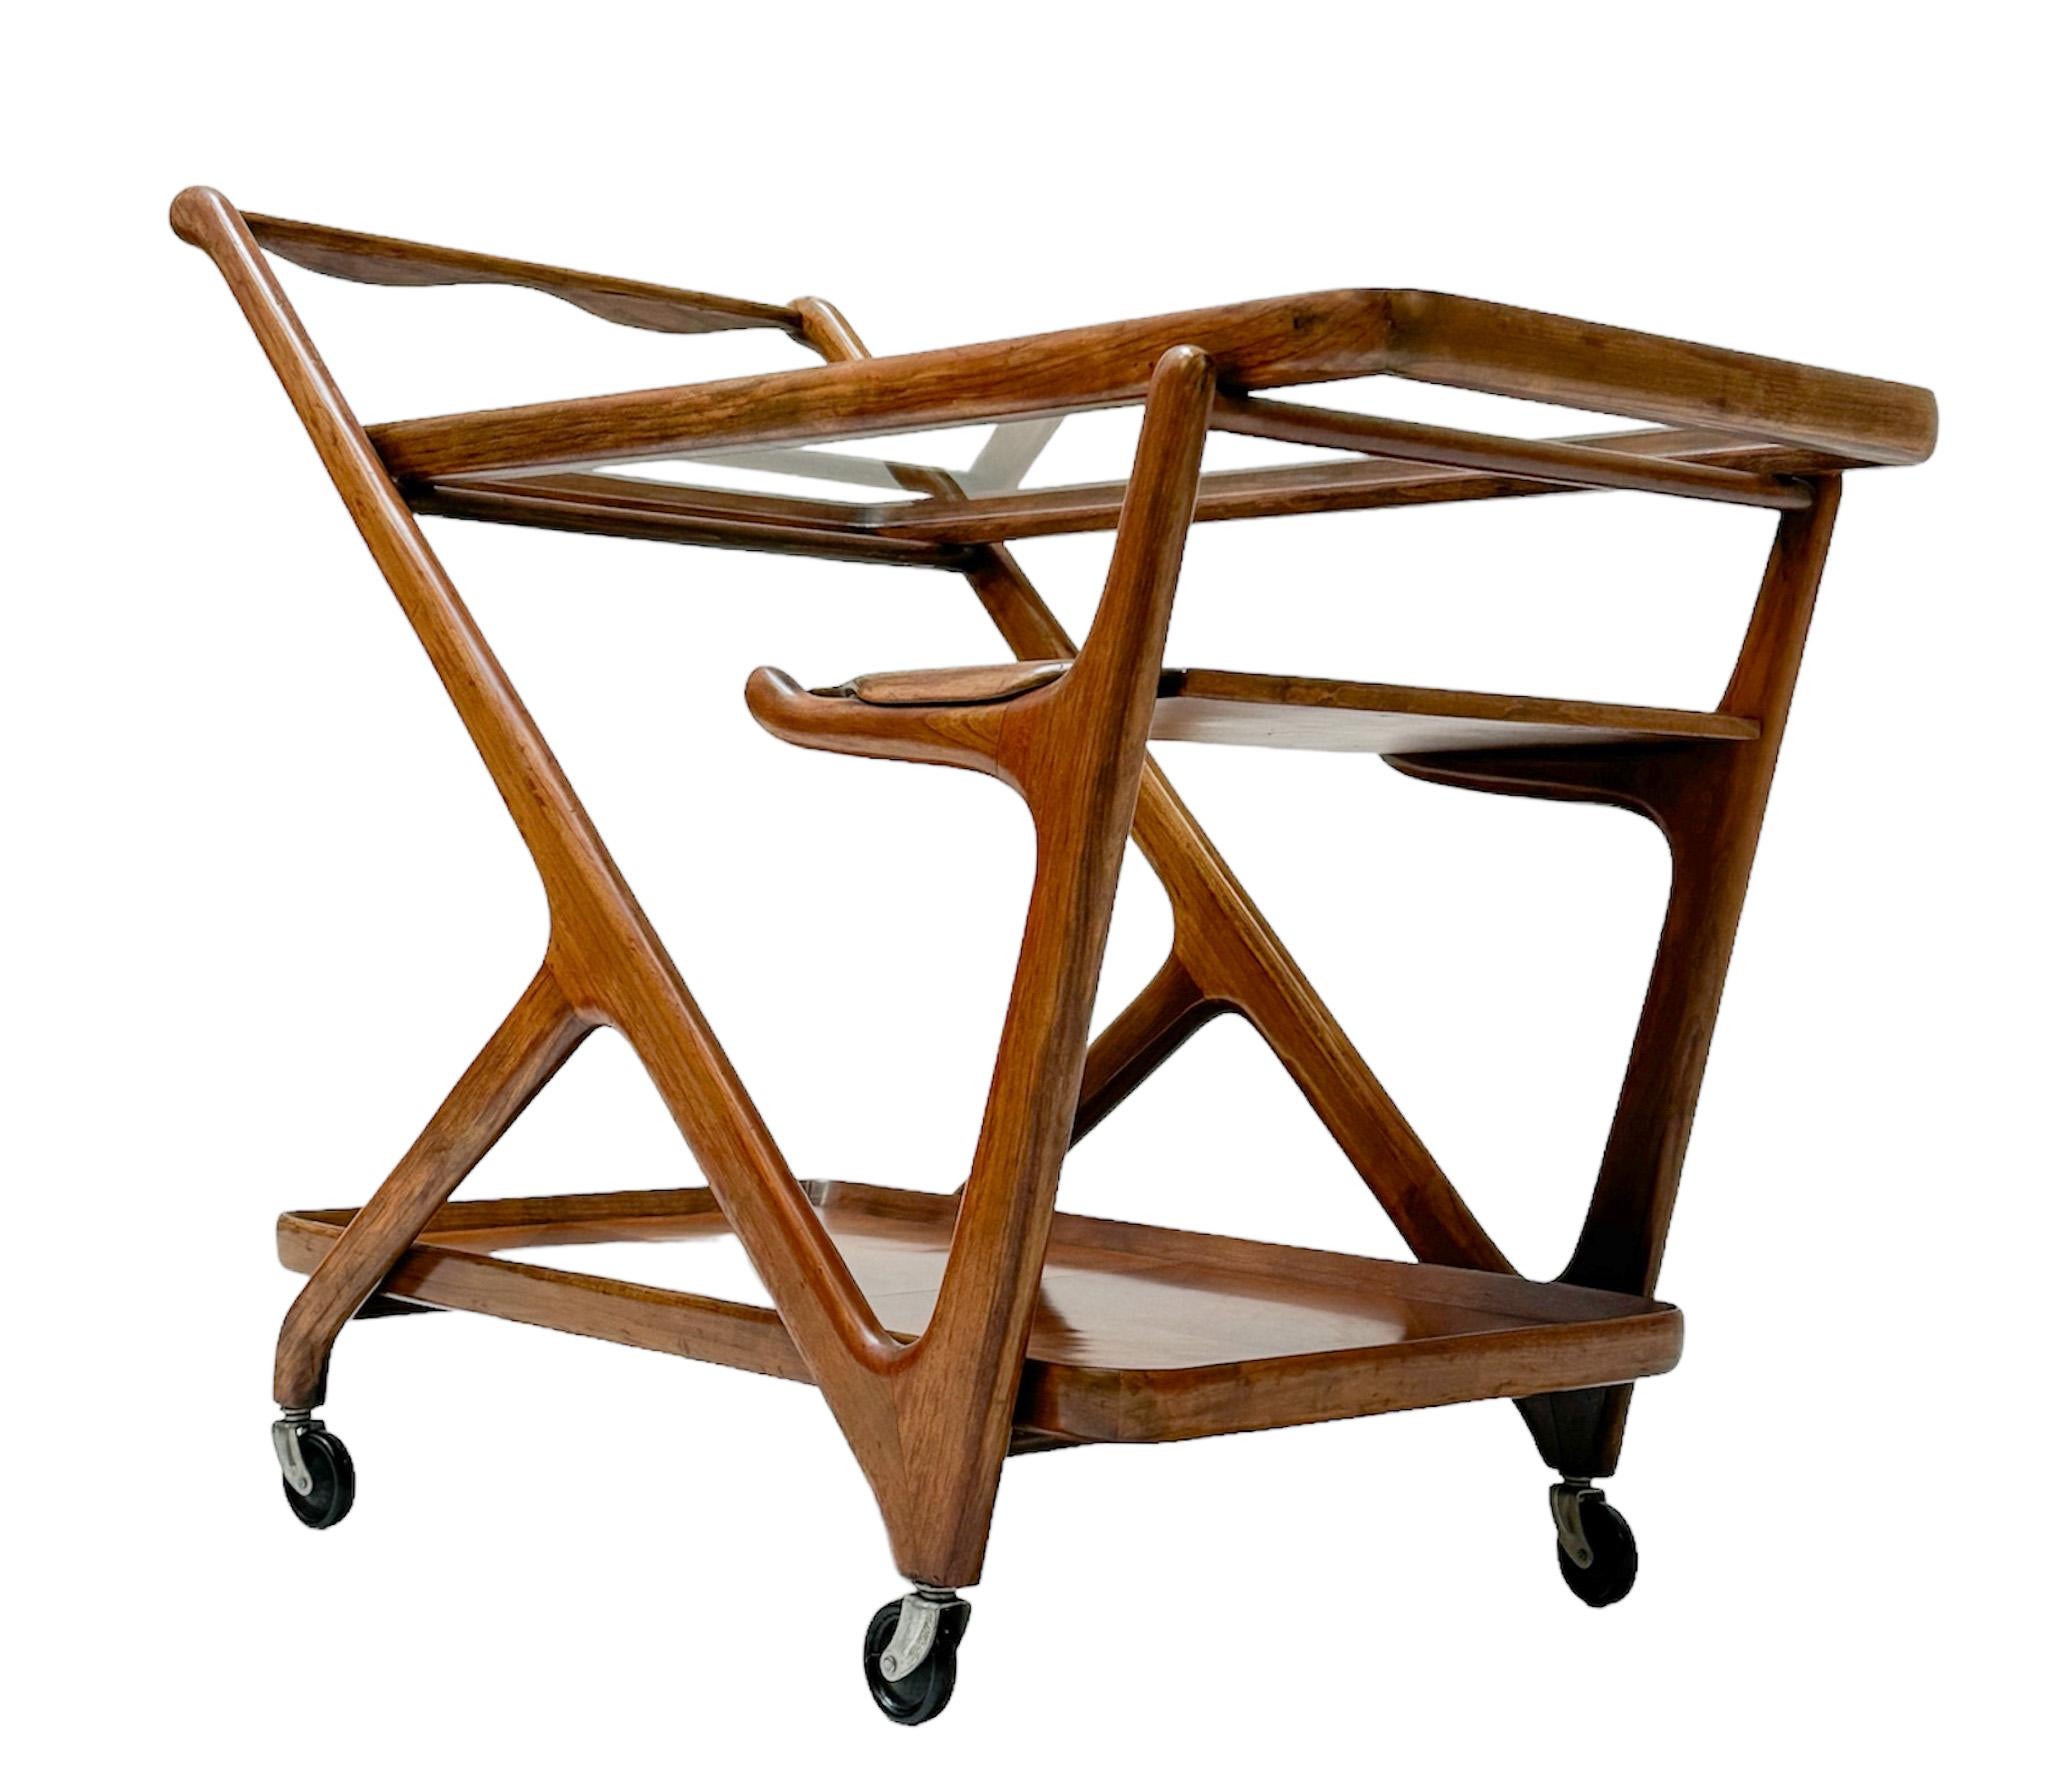 Mid-20th Century Walnut Mid-Century Modern Trolley or Bar Cart by Cesare Lacca for Cassina, 1950s For Sale